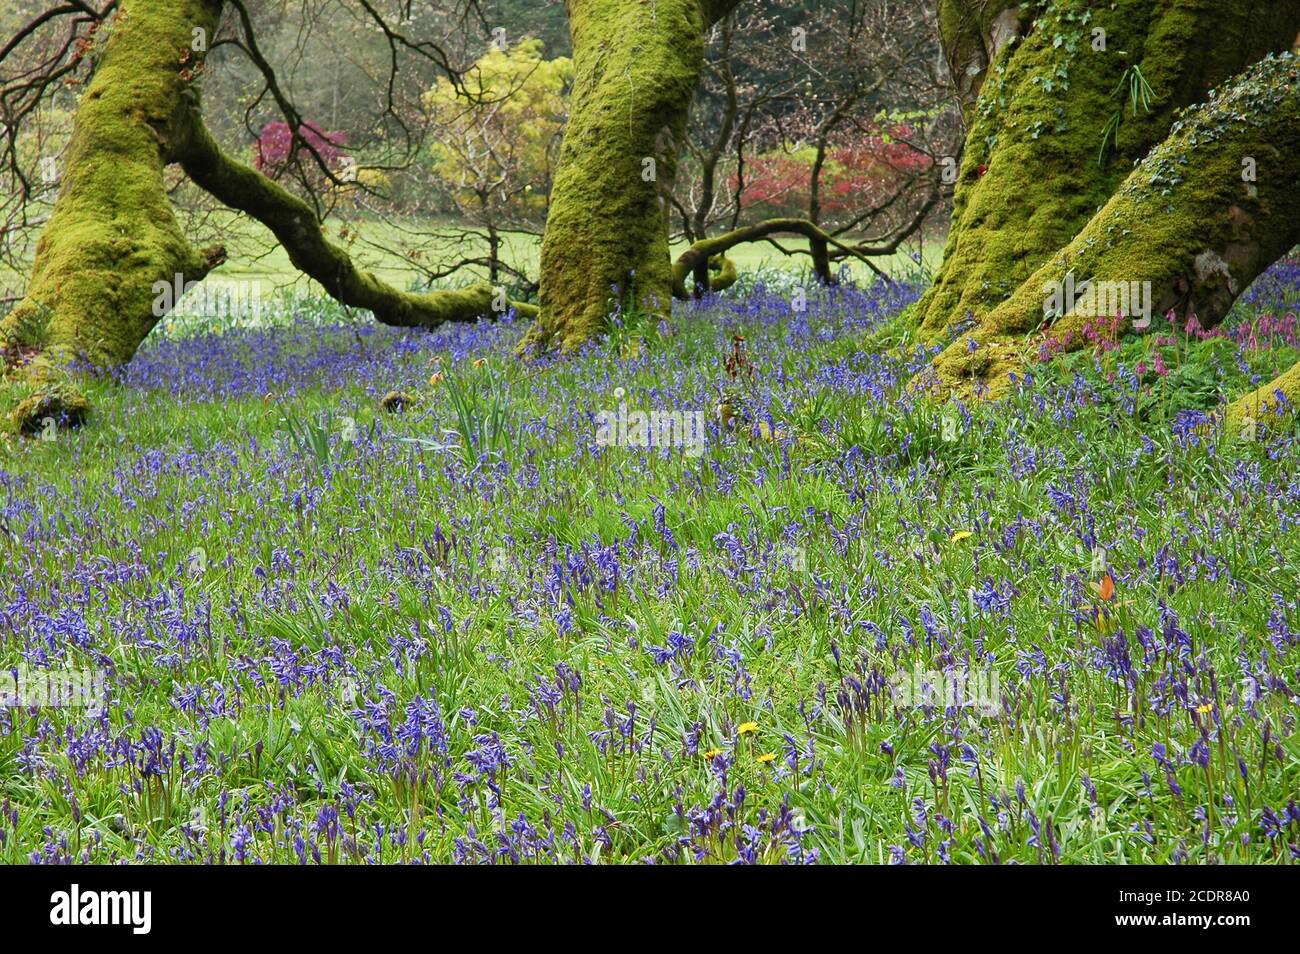 Bluebells, (Hyacinthoides non-scriptus) and mossy tree trunks, Mount Congreve Estate, Kilmeadon, Co. Waterford, Eire. April. With permission. Stock Photo